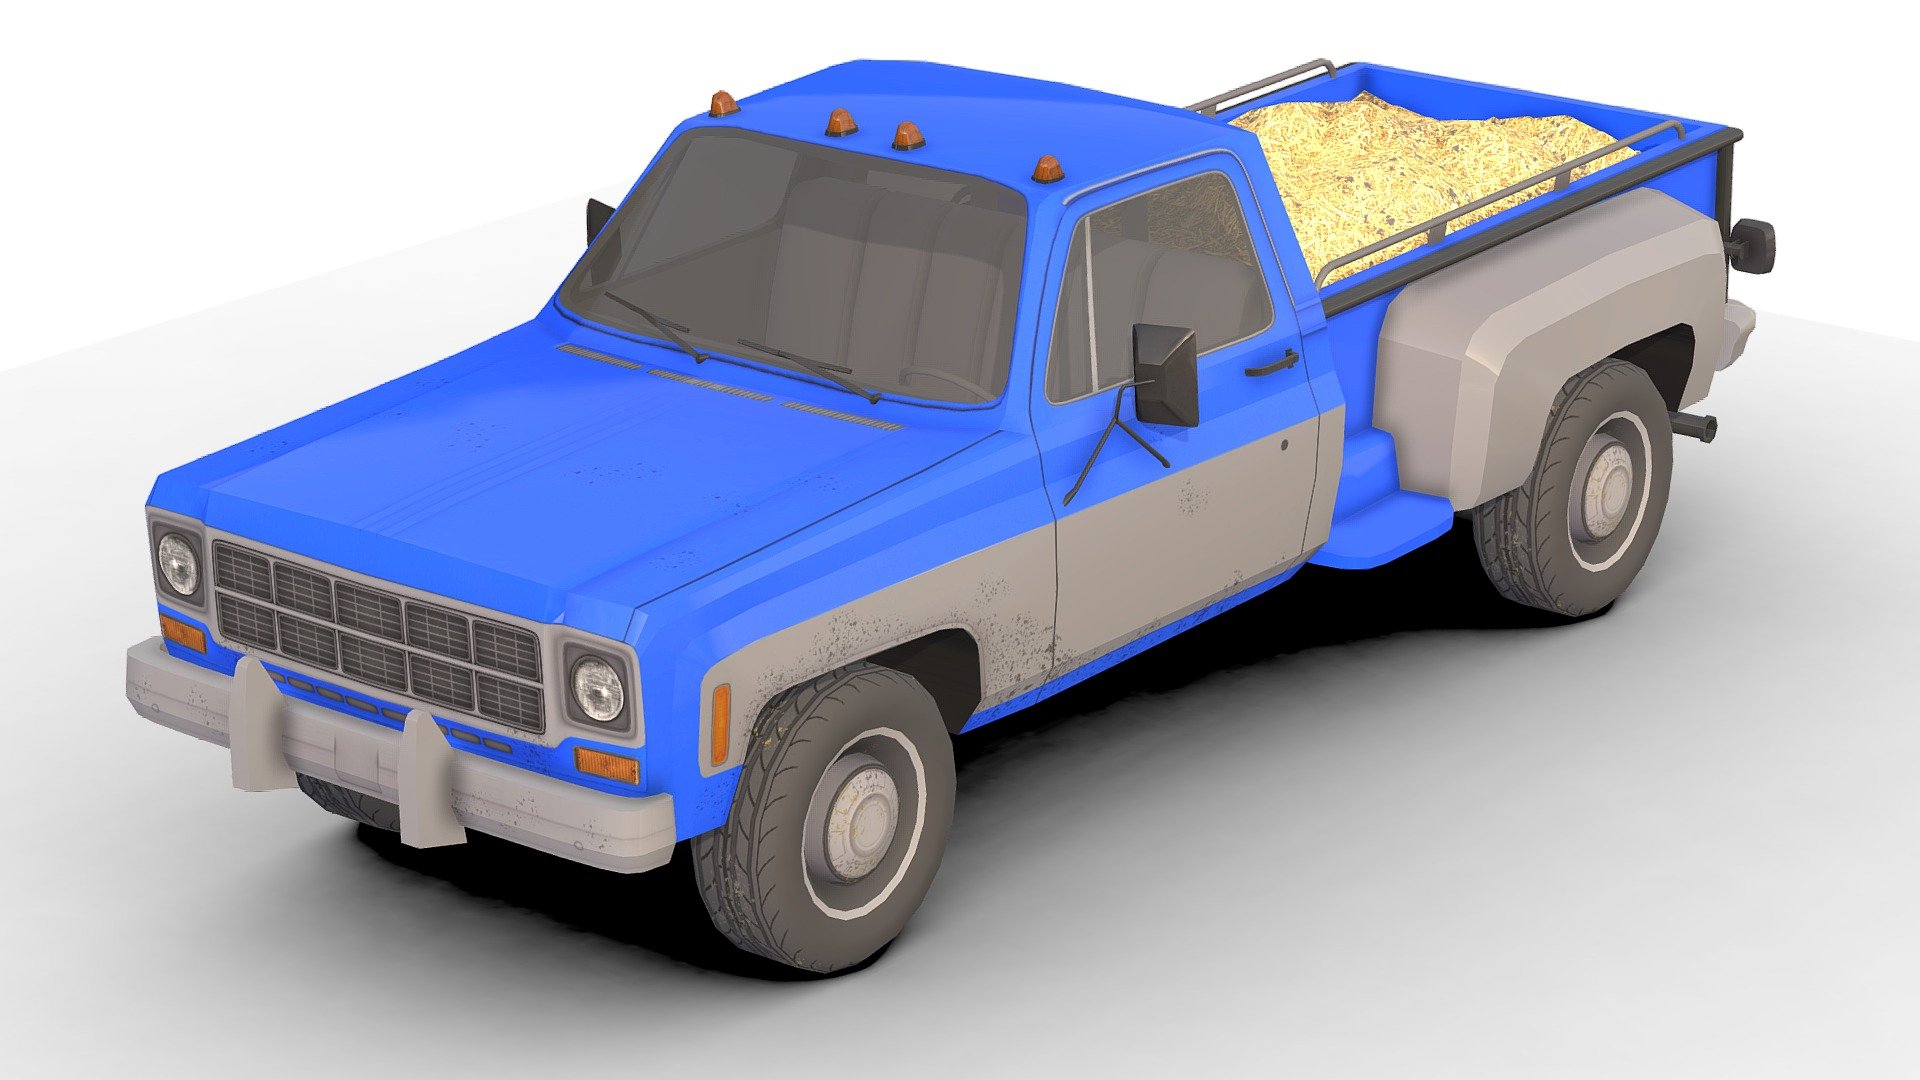 Farm Car Low_Poly .

You can use these models in any game and project.

This model is made with order and precision.

Separated parts (bodys . wheels . Steer . Bulldozers ).

Very Low- Poly.

Truck have separate parts.

Average poly count: 14,000 tris.

Texture size: 2048 / 1024 (PNG).

Number of textures: 3.

Number of materials: 4.

Format: Fbx / Obj / 3DMax .

The original files are in the Additional file .

Wait for my new models.. Your friend (Sidra) 3d model